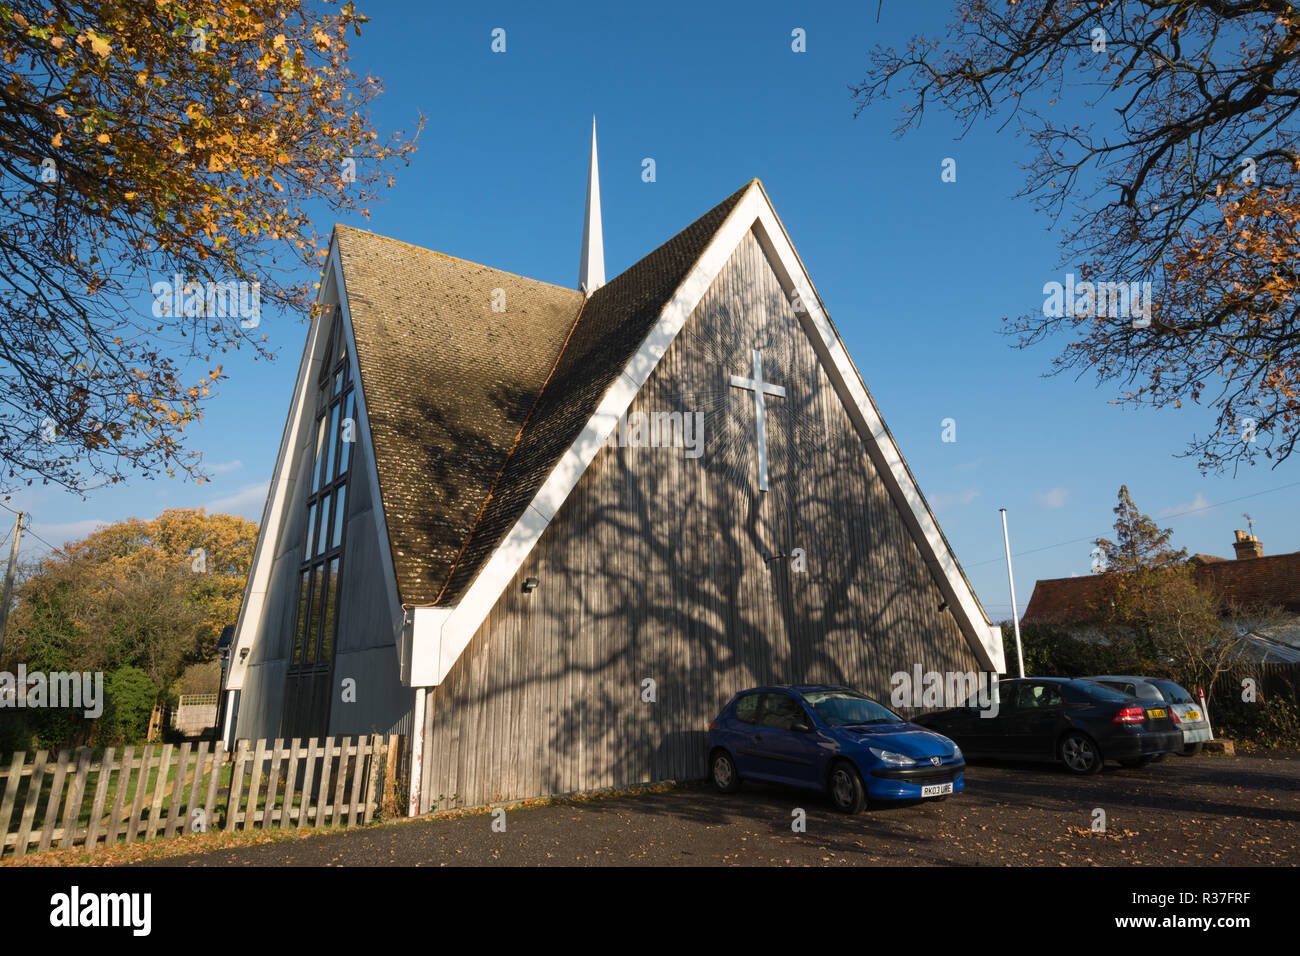 St. Alban's church of England chapel in Wood Street Village, Surrey, UK, completed in 1967. Stock Photo